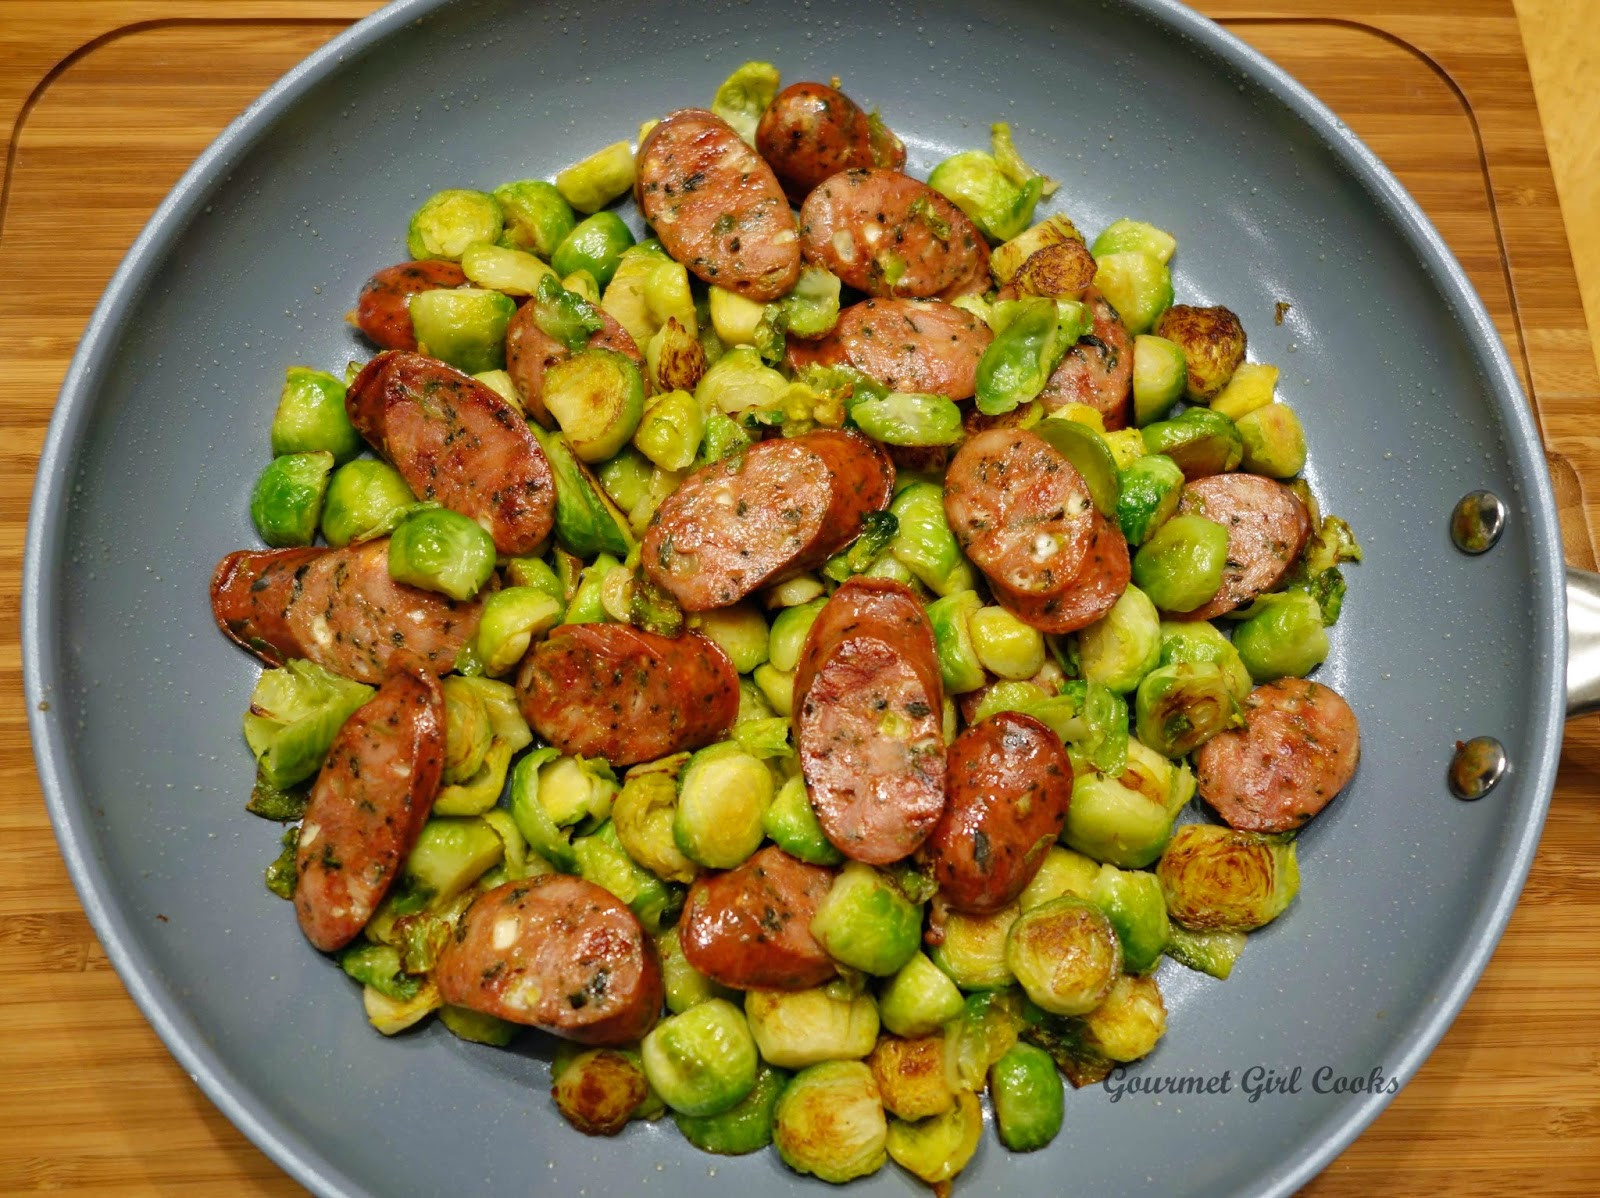 Brunch Side Dishes
 Gourmet Girl Cooks Spicy Sausage & Baby Brussels Sprouts